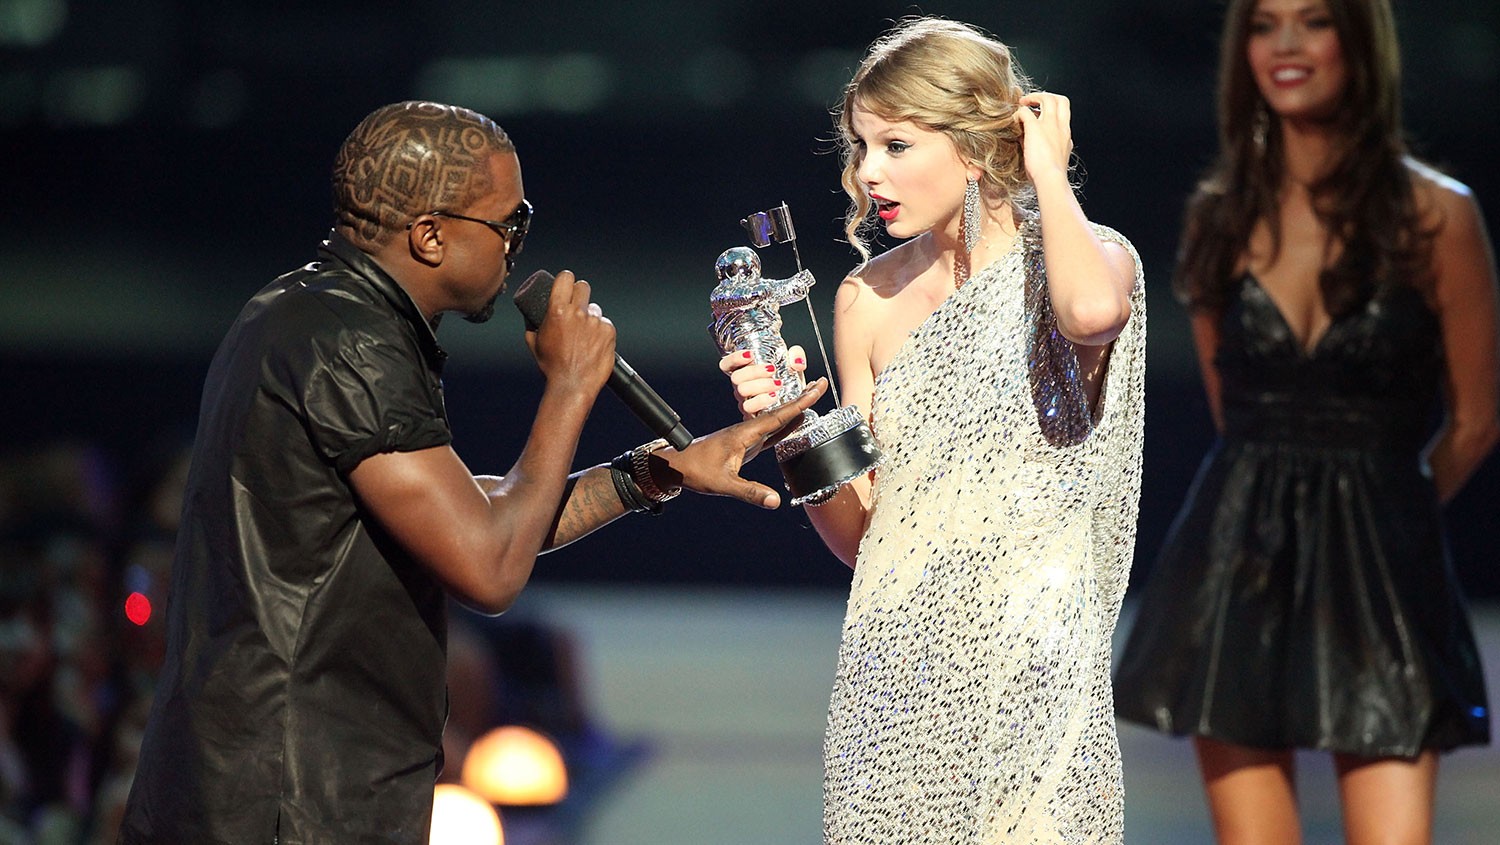 Taylor Swift at the 2009 VMAs. Kanye West is taking her microphone.